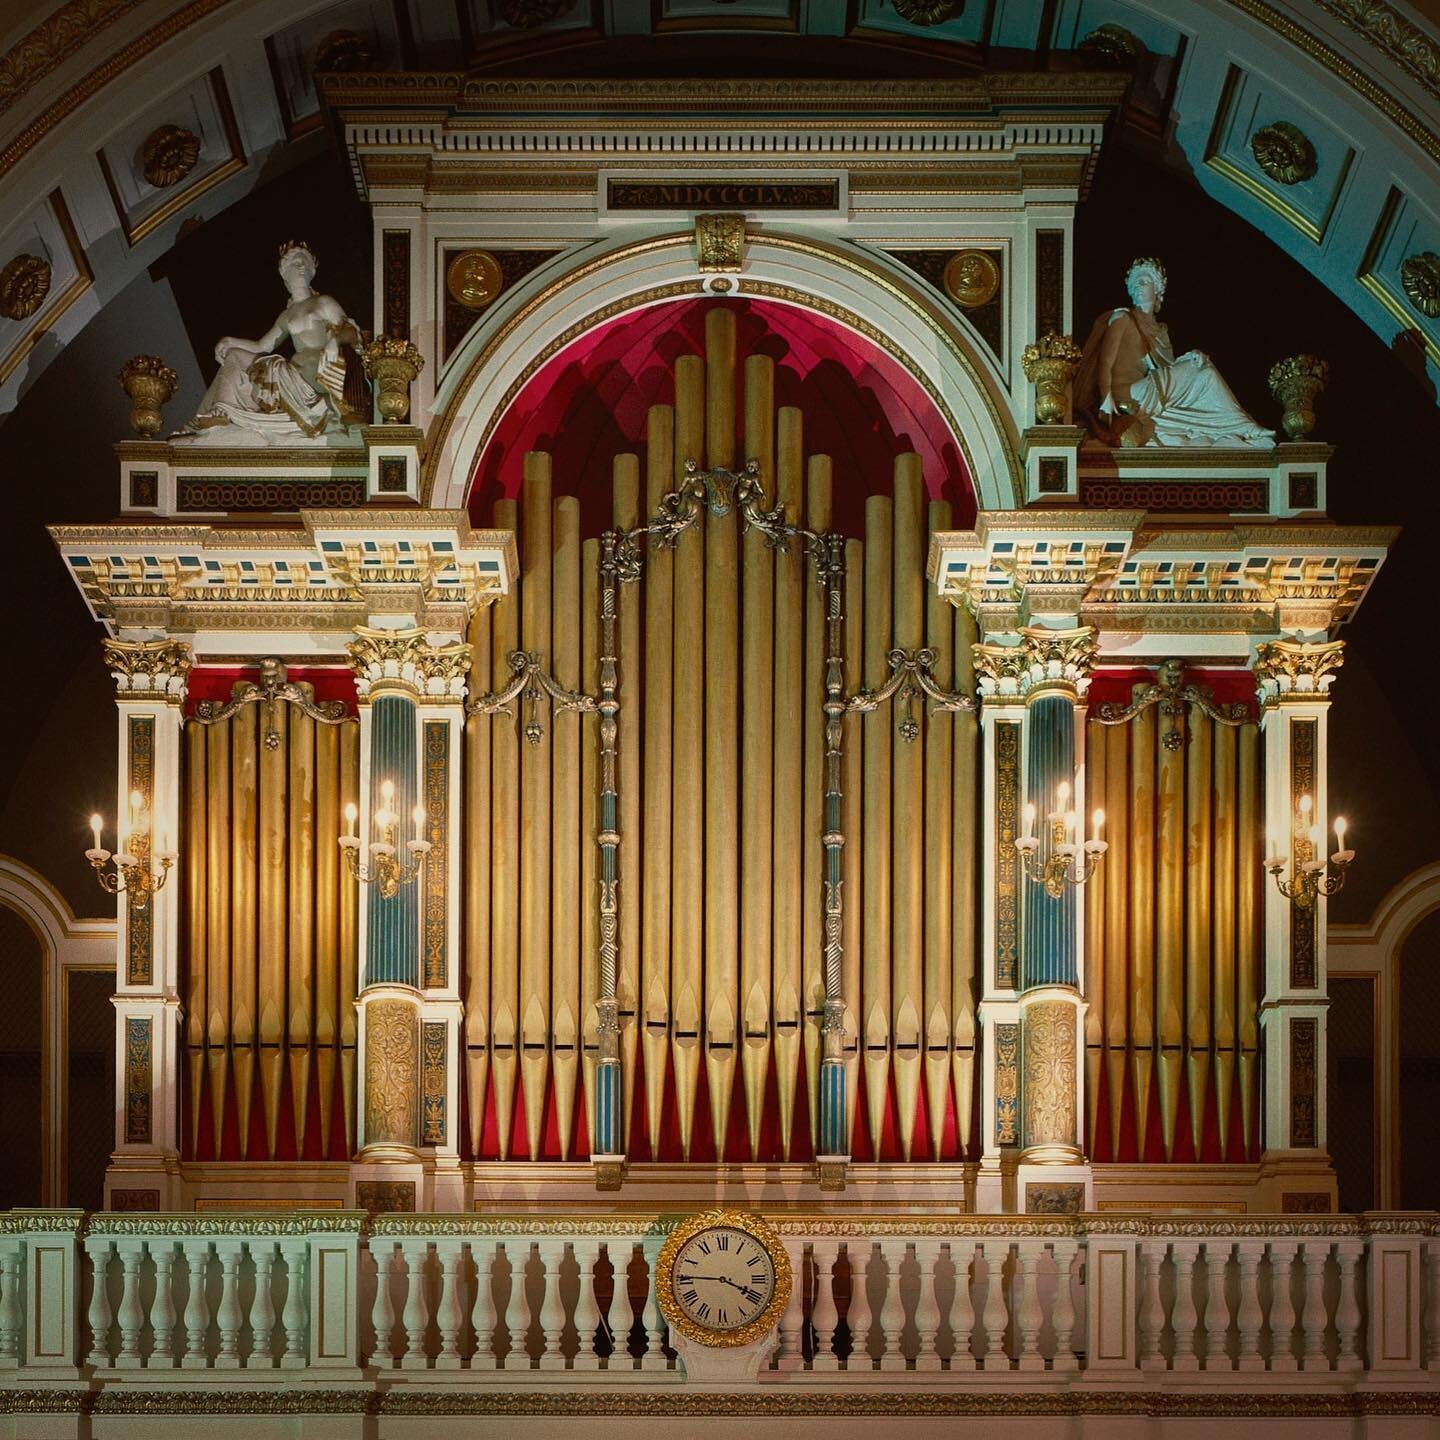 Originally designed for Brighton's Royal Pavilion, the organ was built in 1818 by Henry Cephas Lincoln and was once the centrepiece of entertainment for Queen Victoria, princes and prime ministers. The organ, now in the ballroom at Buckingham Palace,